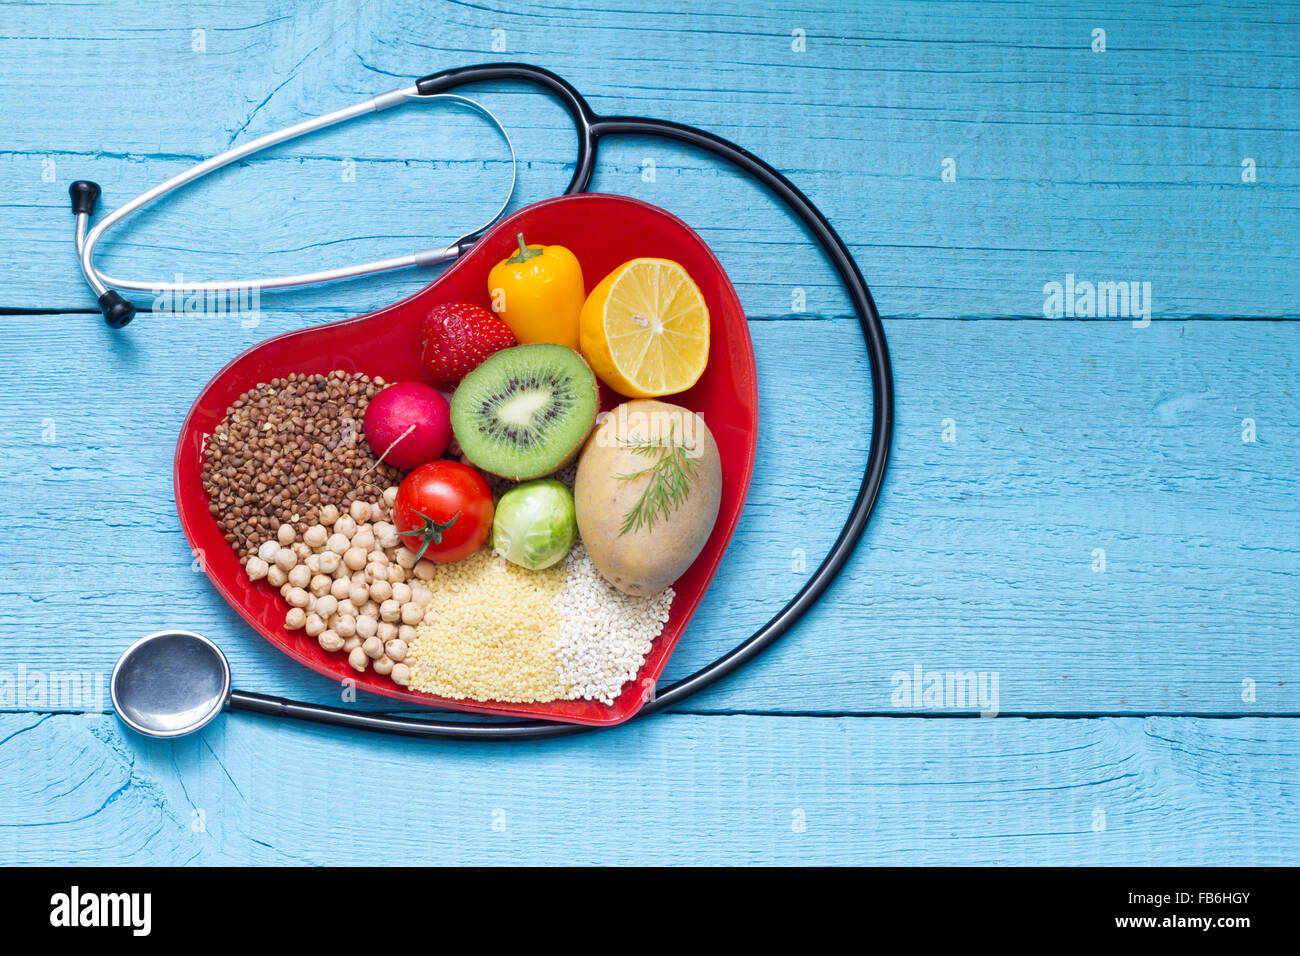 Food on heart plate with stethoscope cardiology concept on blue boards Stock Photo